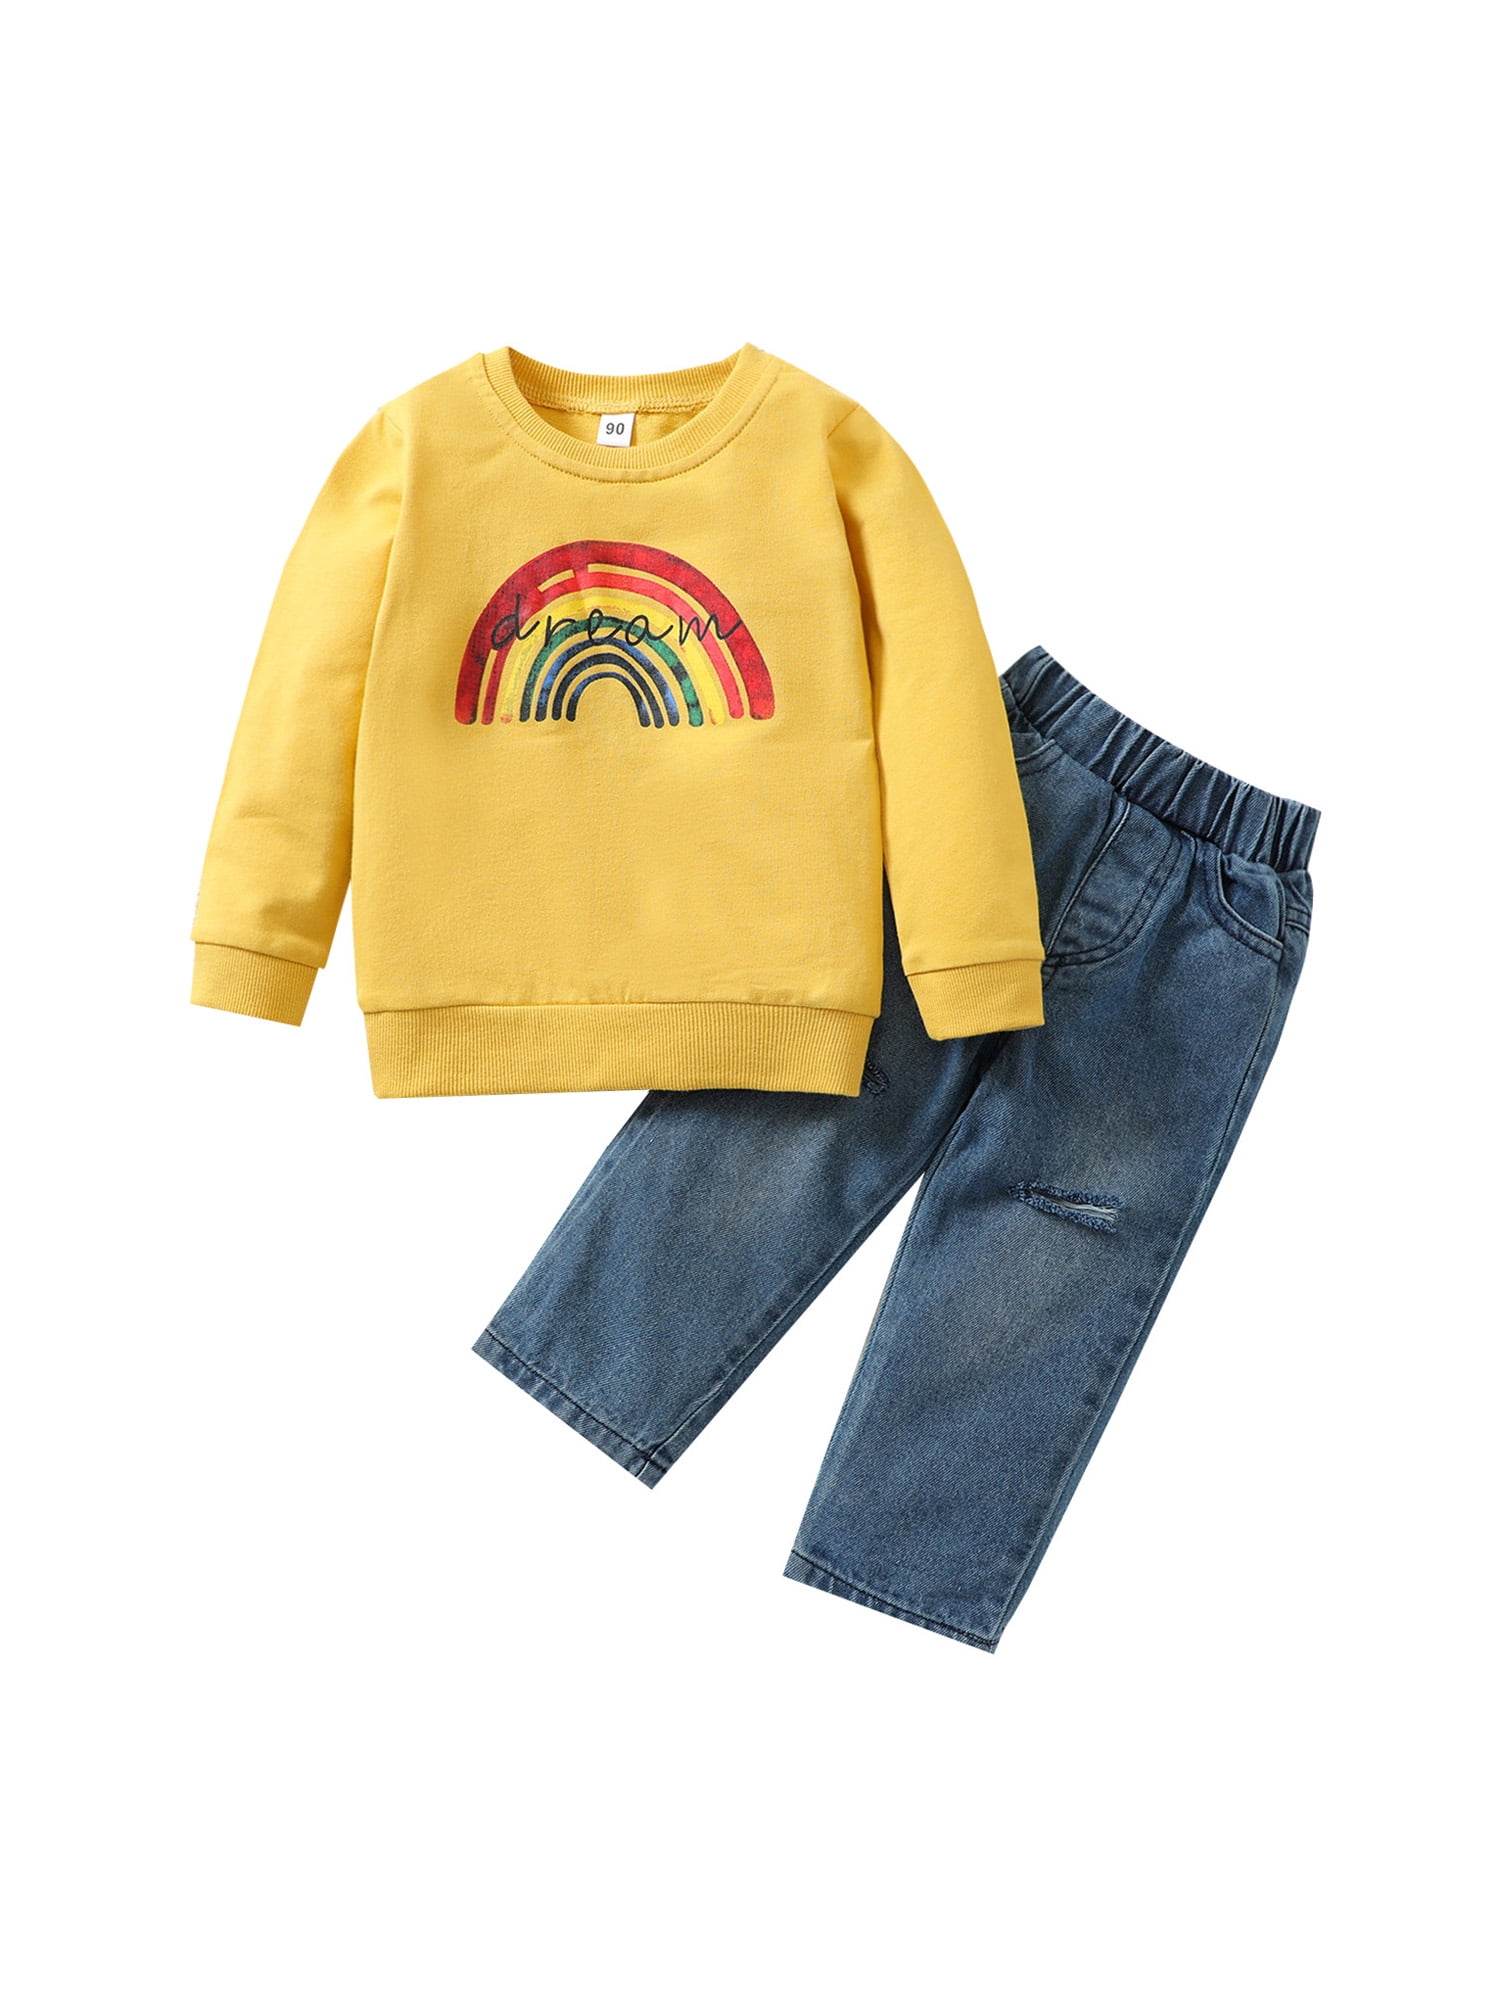 Toddler Newborn Infant Girls Boys Long Sleeve Rainbow Warm Tops Outfits Clothes